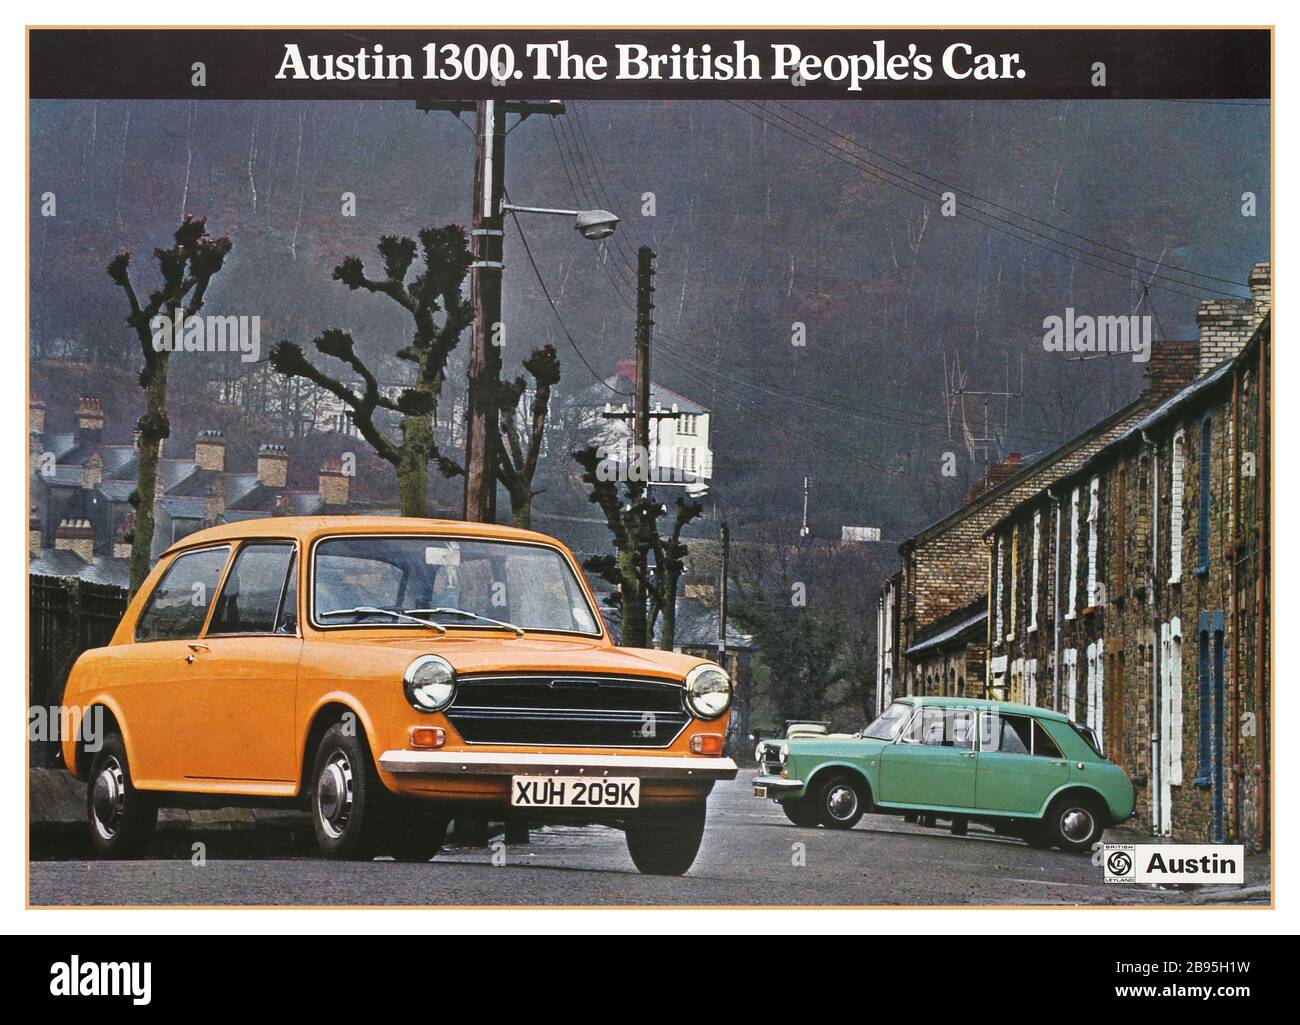 Vintage 1970s British Motorcar advertising poster Austin 1300. The British People's Car. Poster features a colour image of two Austin 1300s (a three-doors yellow model and a five-doors green model on the right) parked in a street. The Austin 1300, manufactured by British Leyland, was part of a range of small family cars, built by the British Motor Corporation (BMC)  later British Leyland under the name BMC Stock Photo